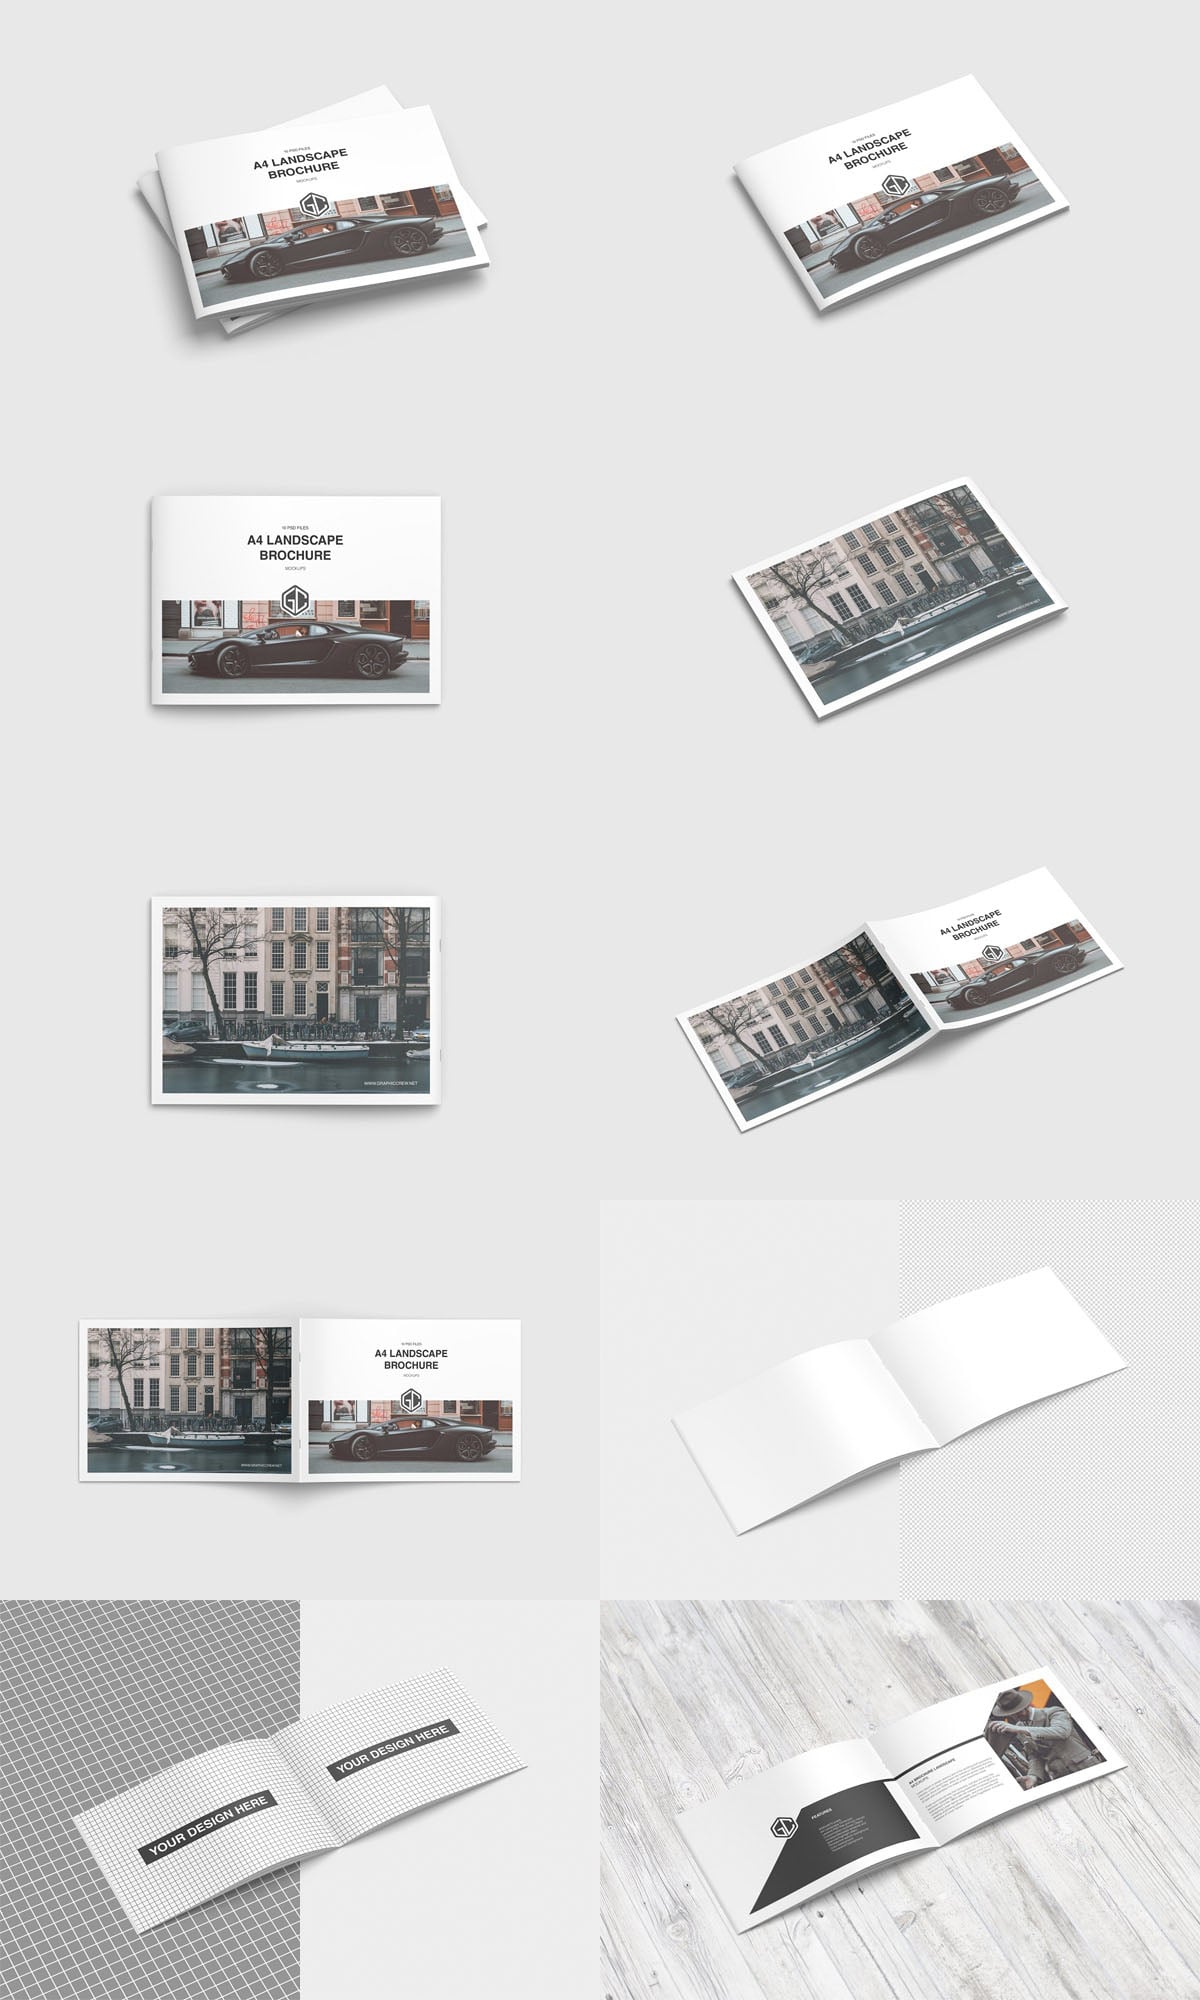 Download A4 Landscape Brochure Mockup Find The Perfect Creative Mockups Freebies To Showcase Your Project To Life